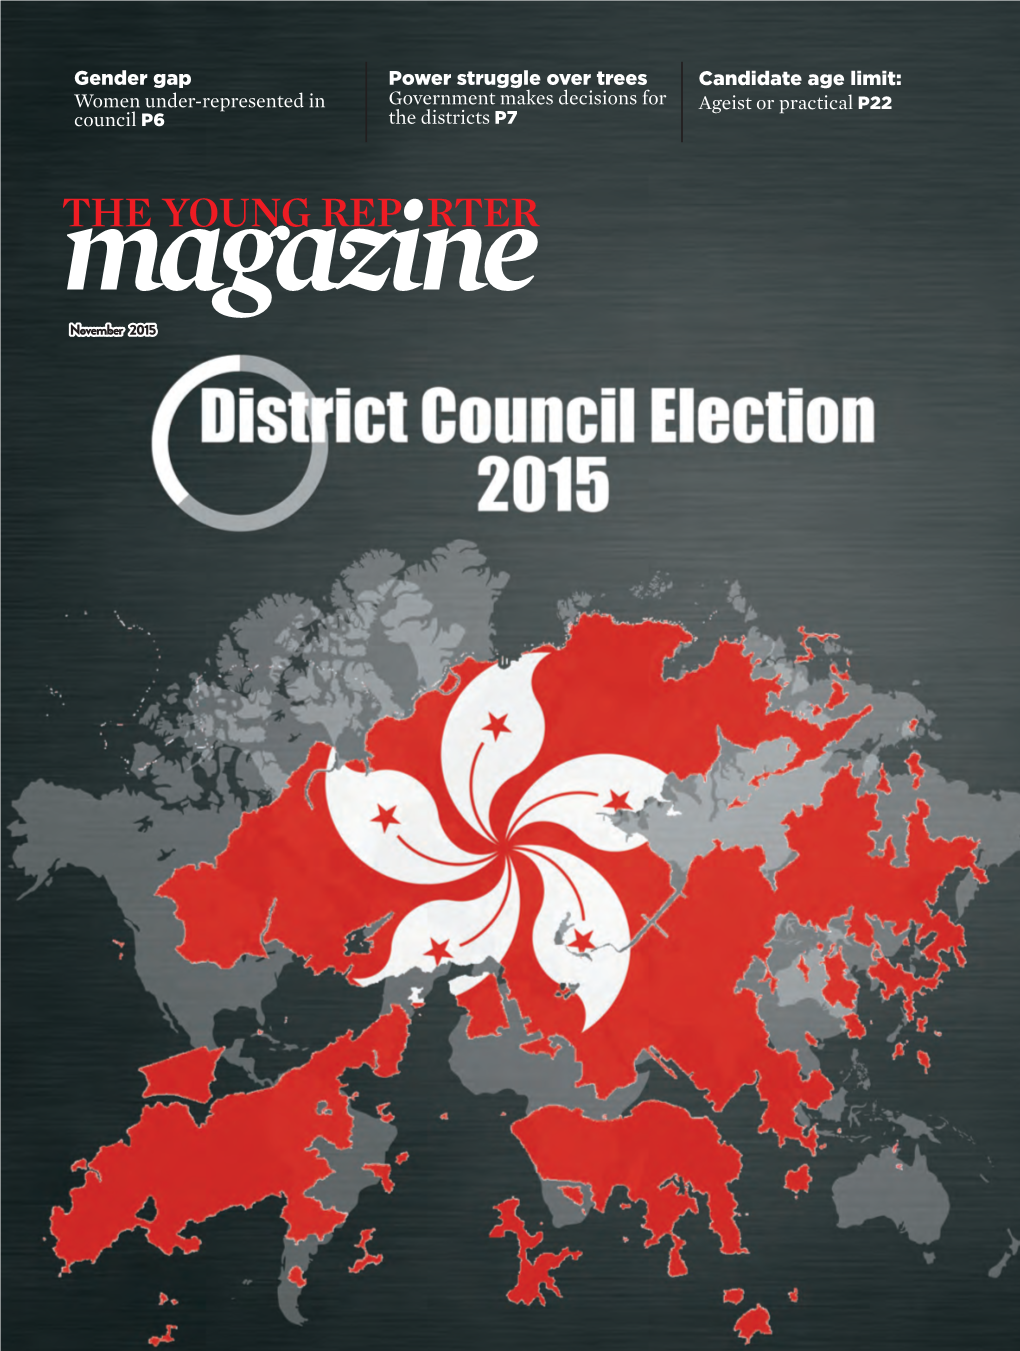 From District Council to Legco